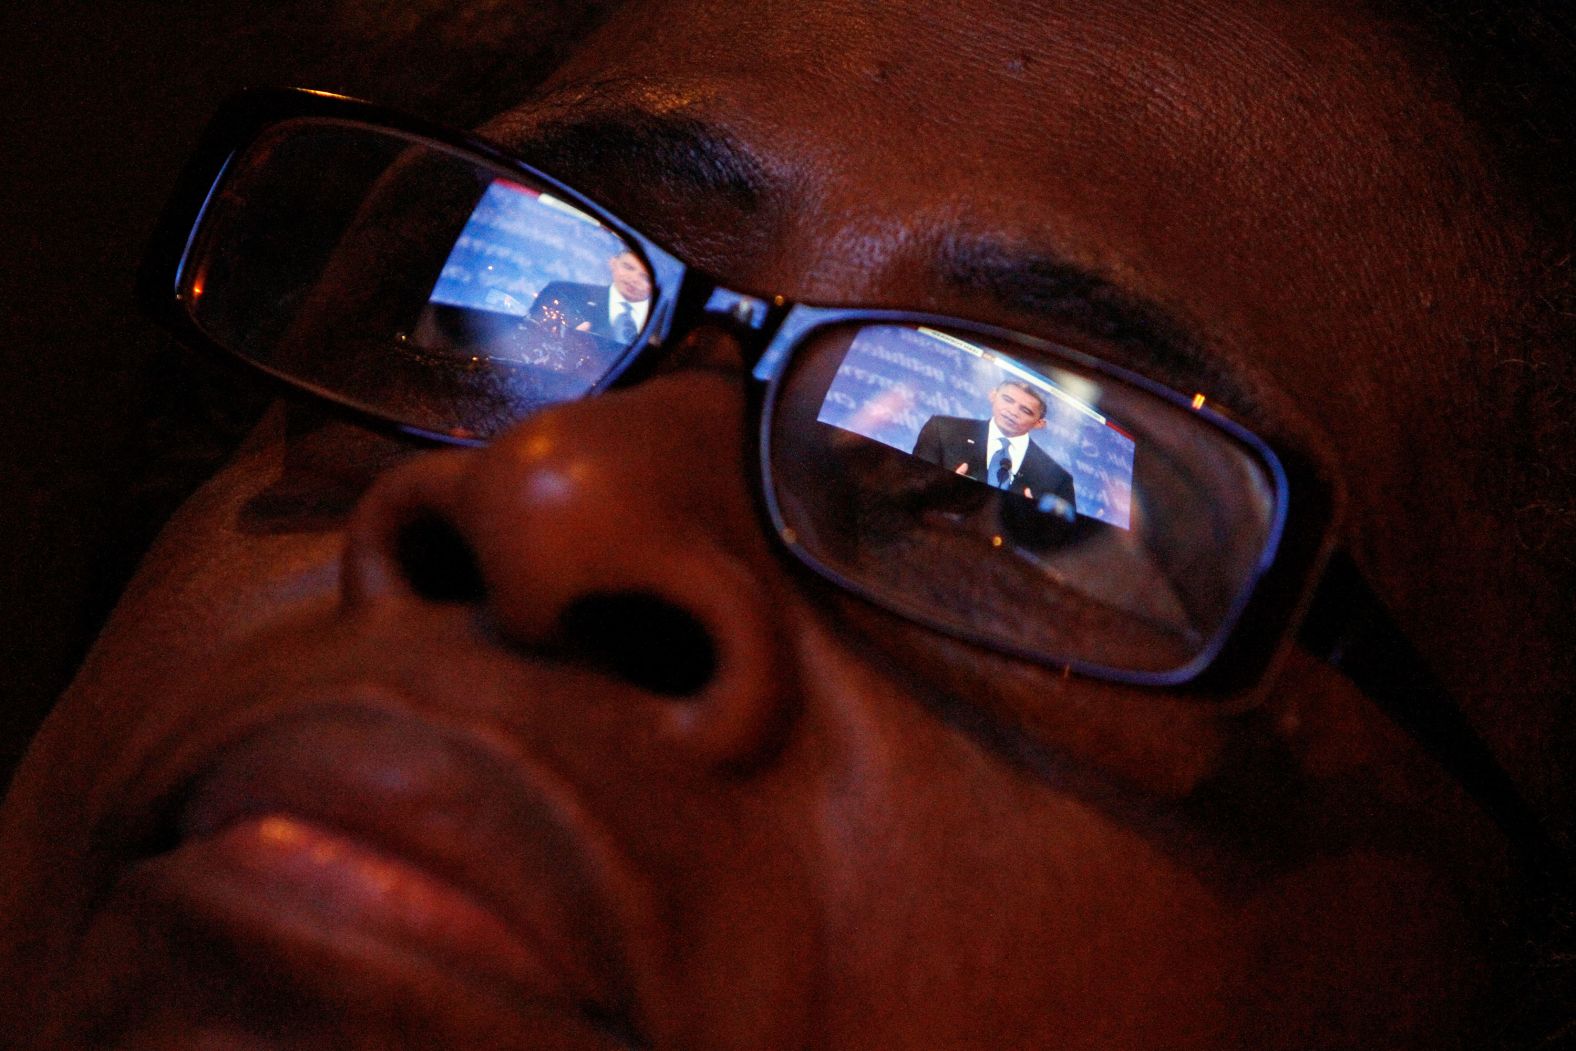 Obama is reflected in Mary Jackson's eyeglasses as she watches his first presidential debate with Mitt Romney in 2012.